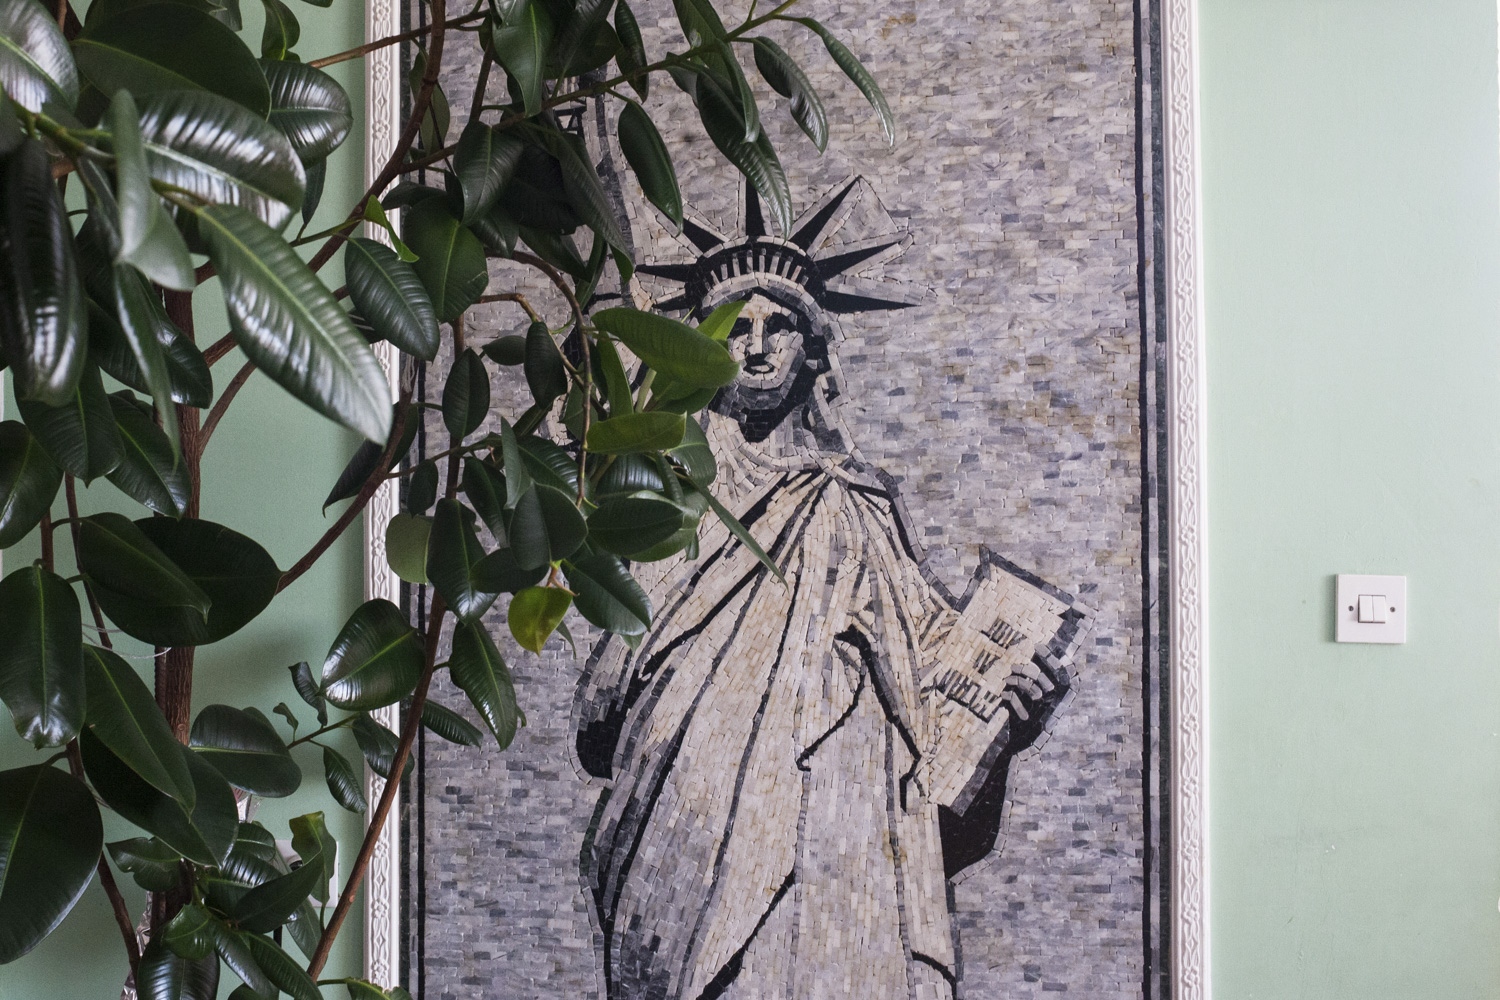 Kosovo: 51st State - Mosaic of the Statue of Liberty in the living room of...